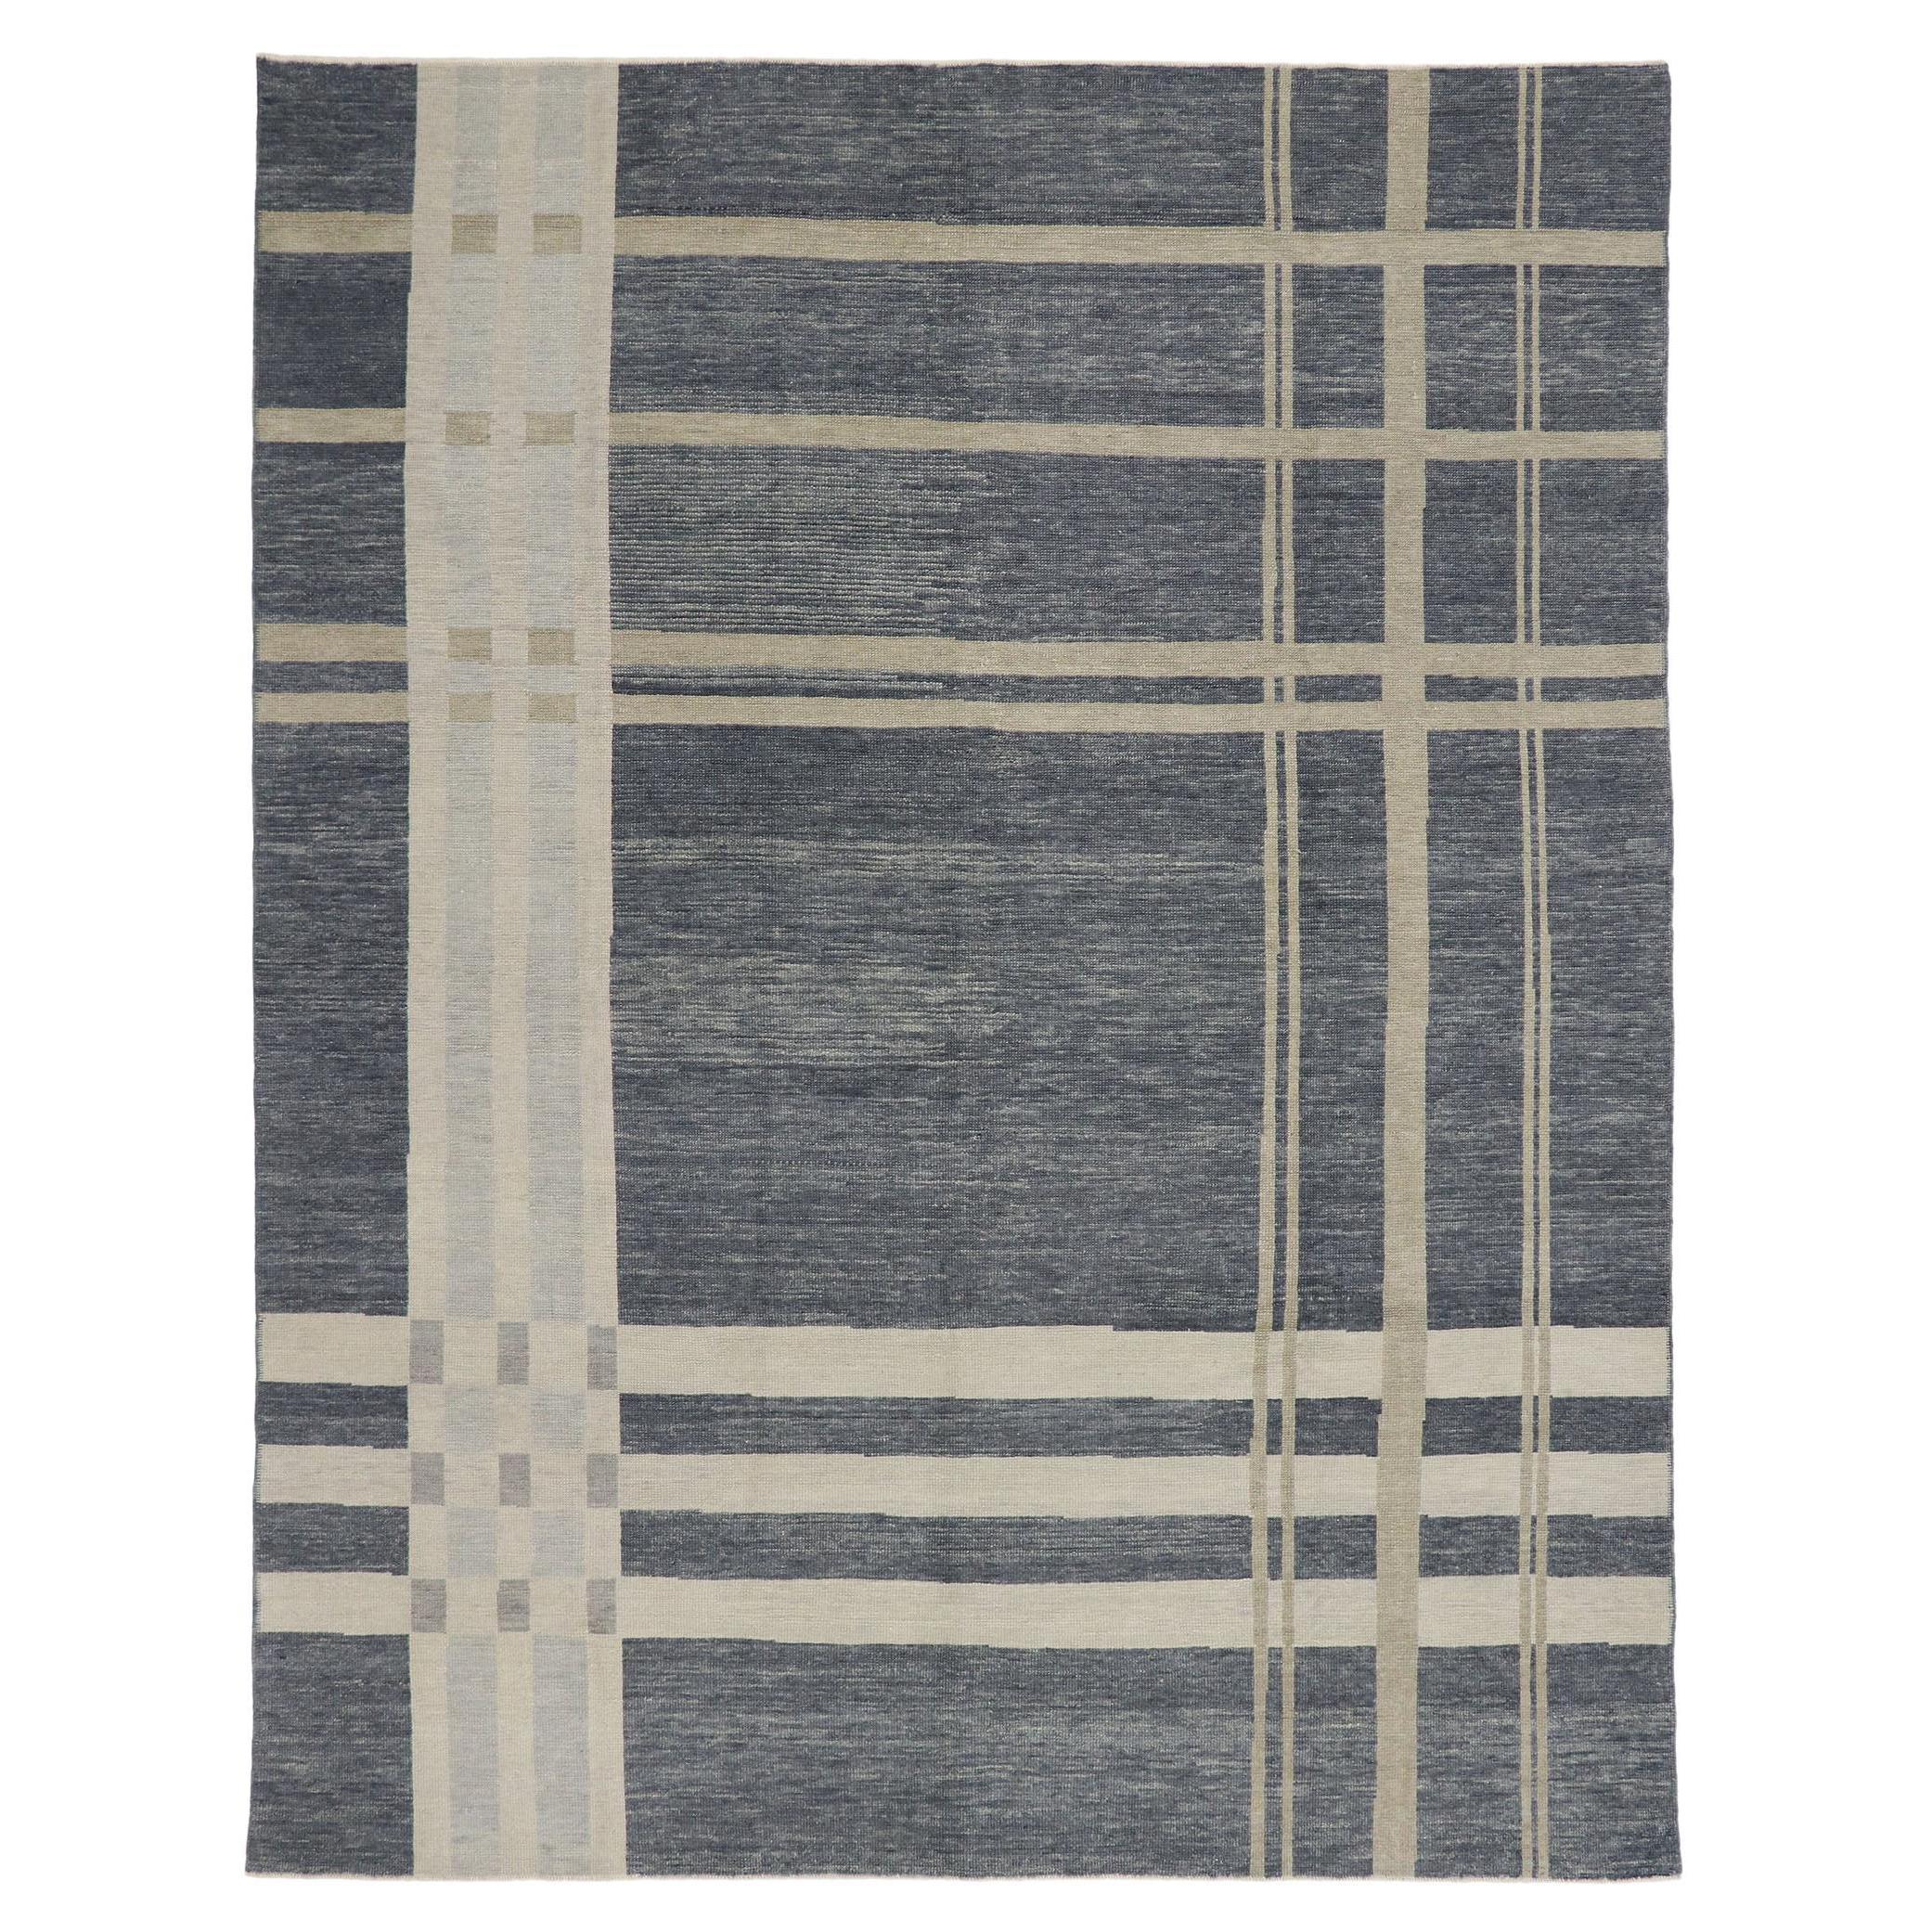 New Modern Gray Plaid Tartan Rug with Ivy League Style For Sale